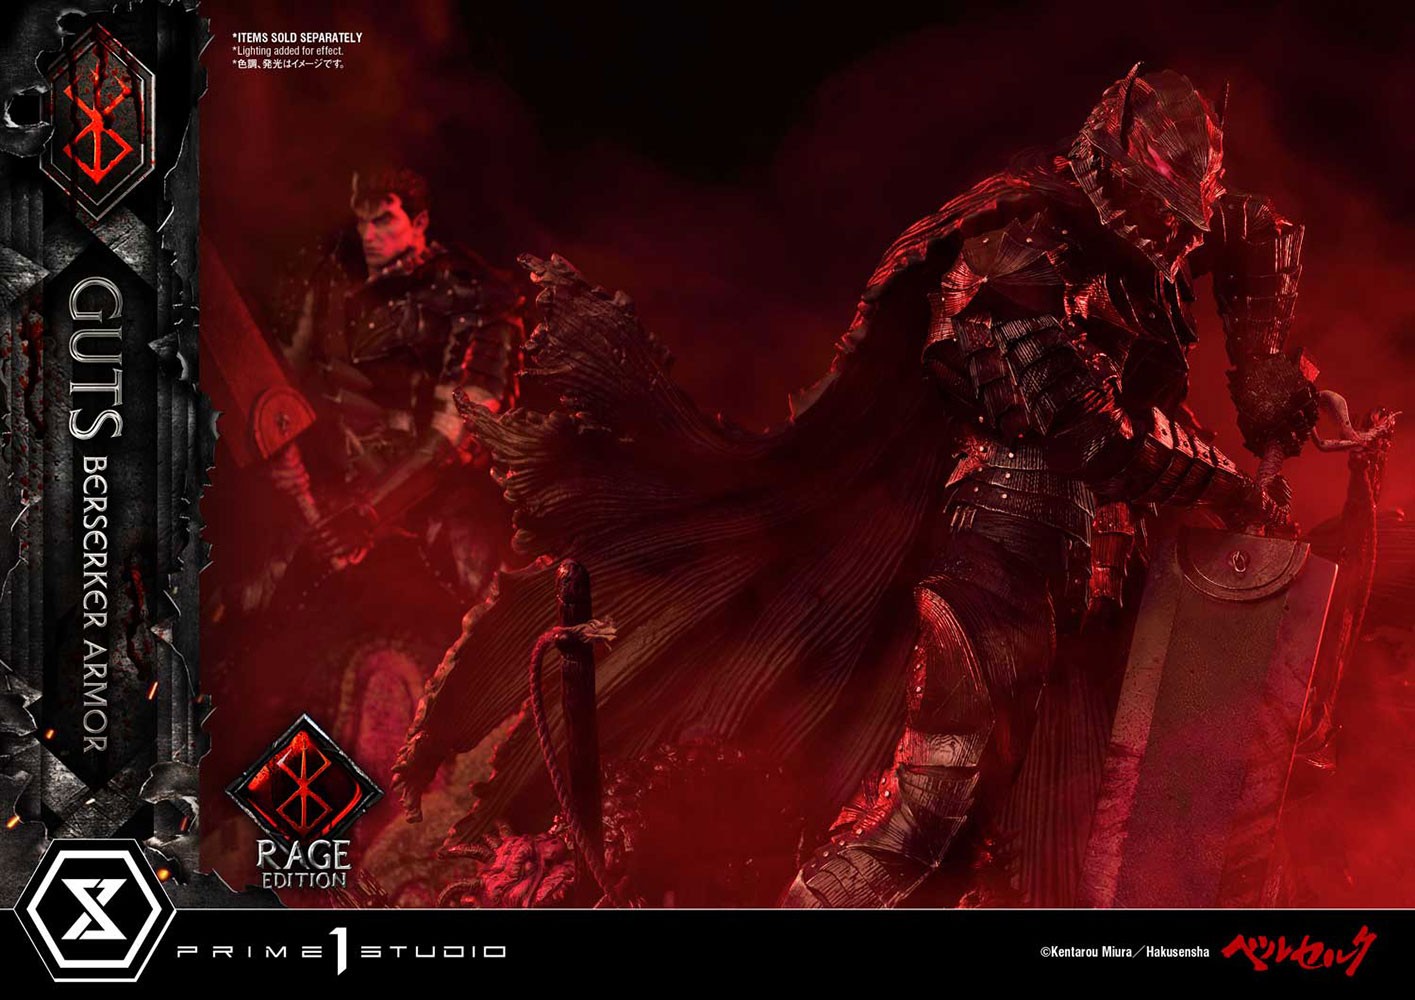 Guts Berserker Armor (Rage Edition) Collector Edition (Prototype Shown) View 45